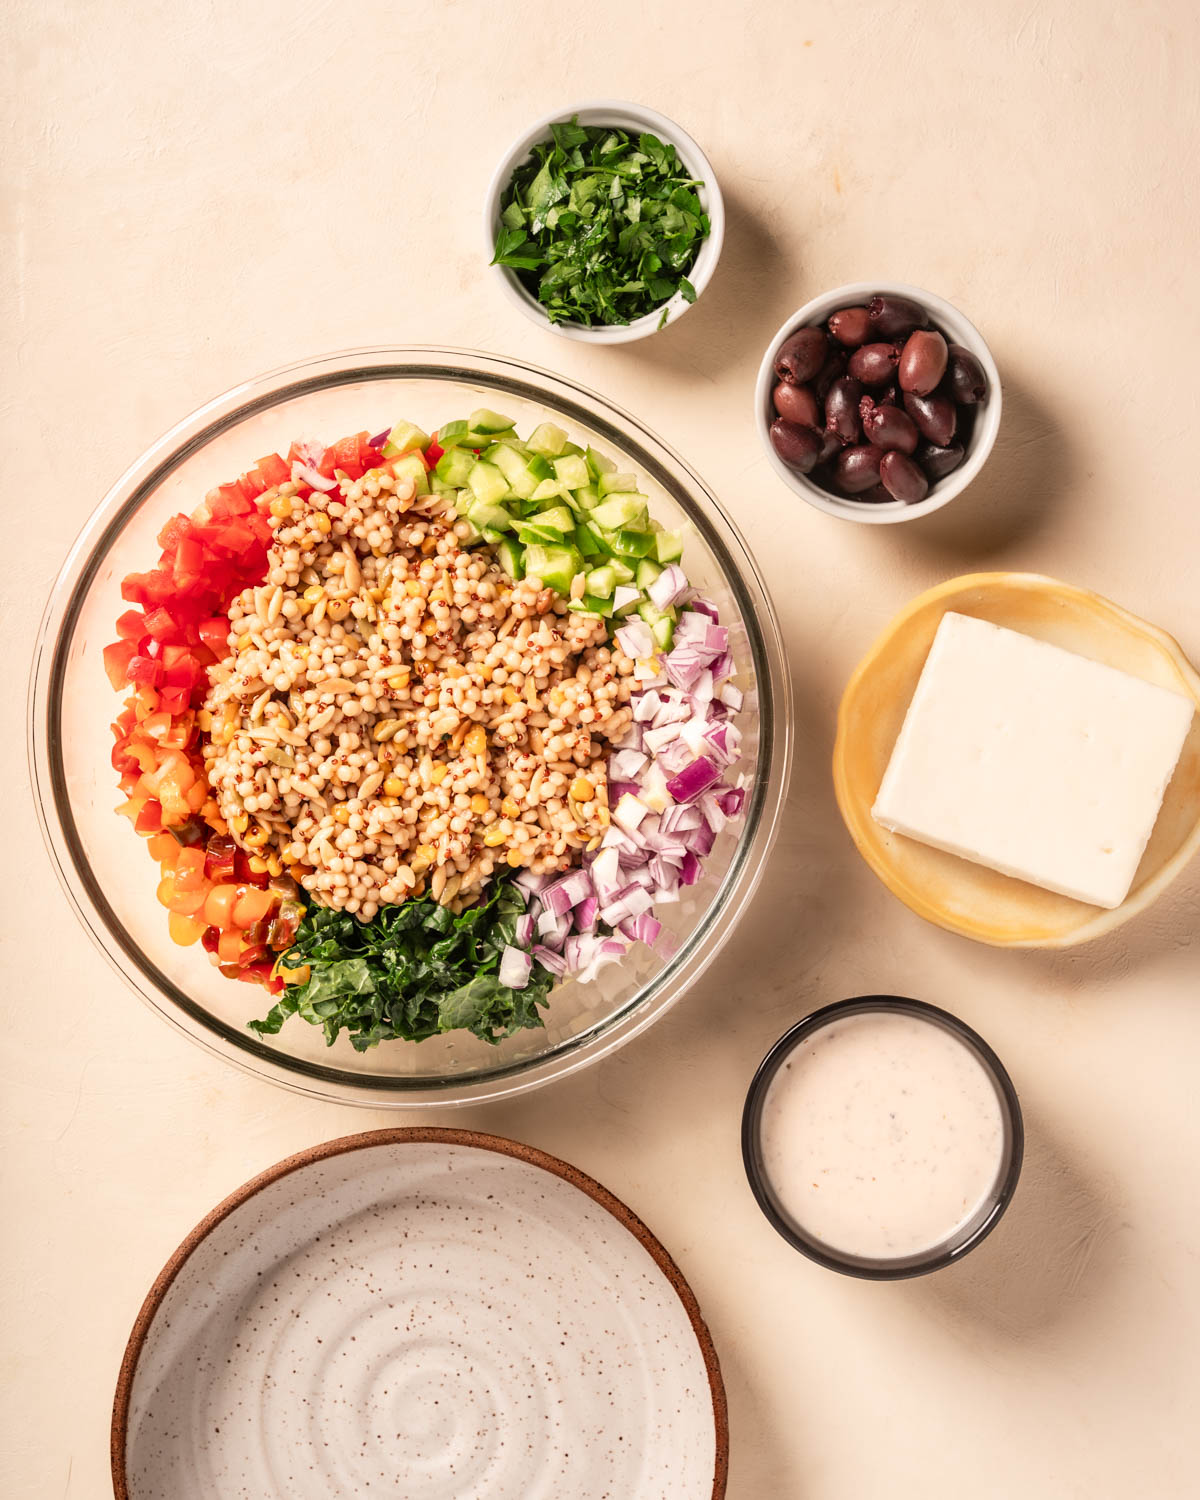 Ingredients for a grain bowl with a large bowl filled with grains and veggies. To the right are smaller plates and bowls with other colorful ingredients.